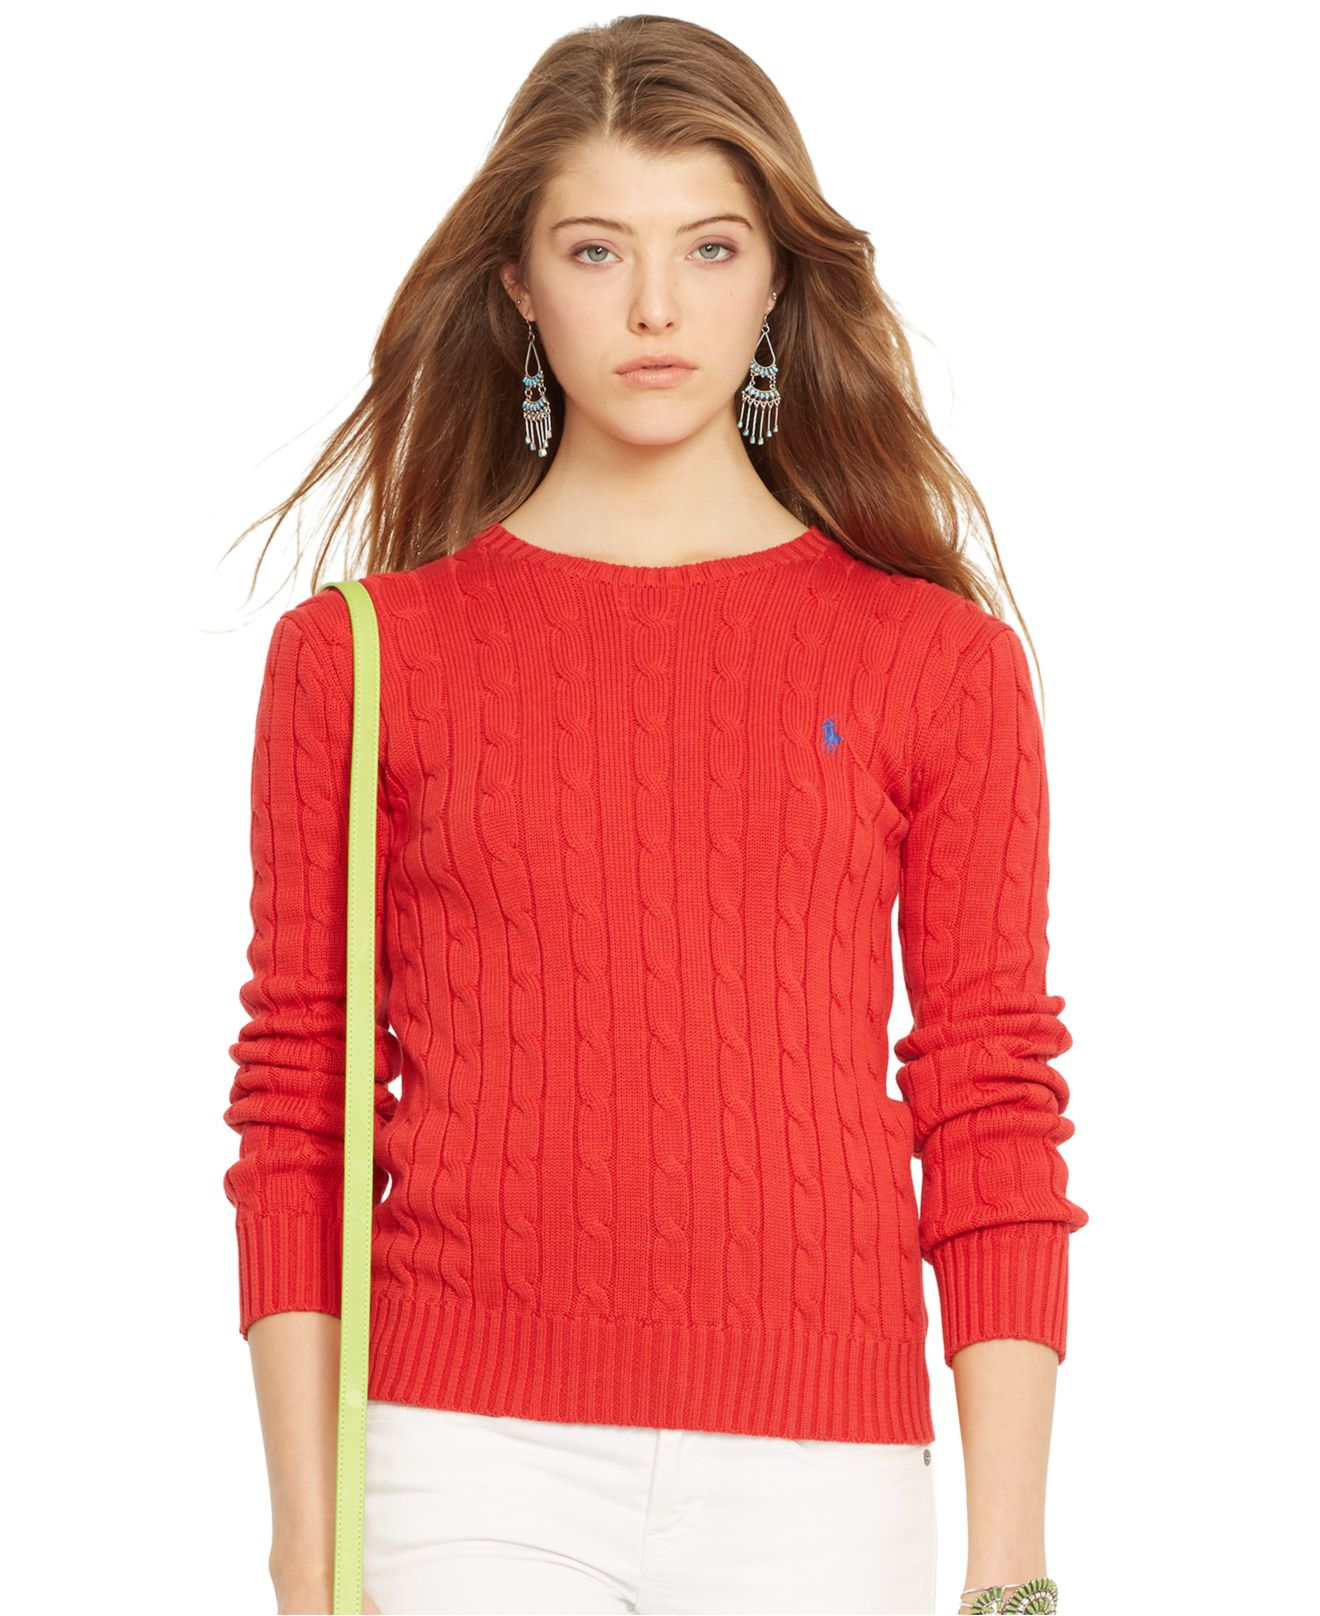 Polo Ralph Lauren Crew-Neck Cable-Knit Sweater in Red - Lyst